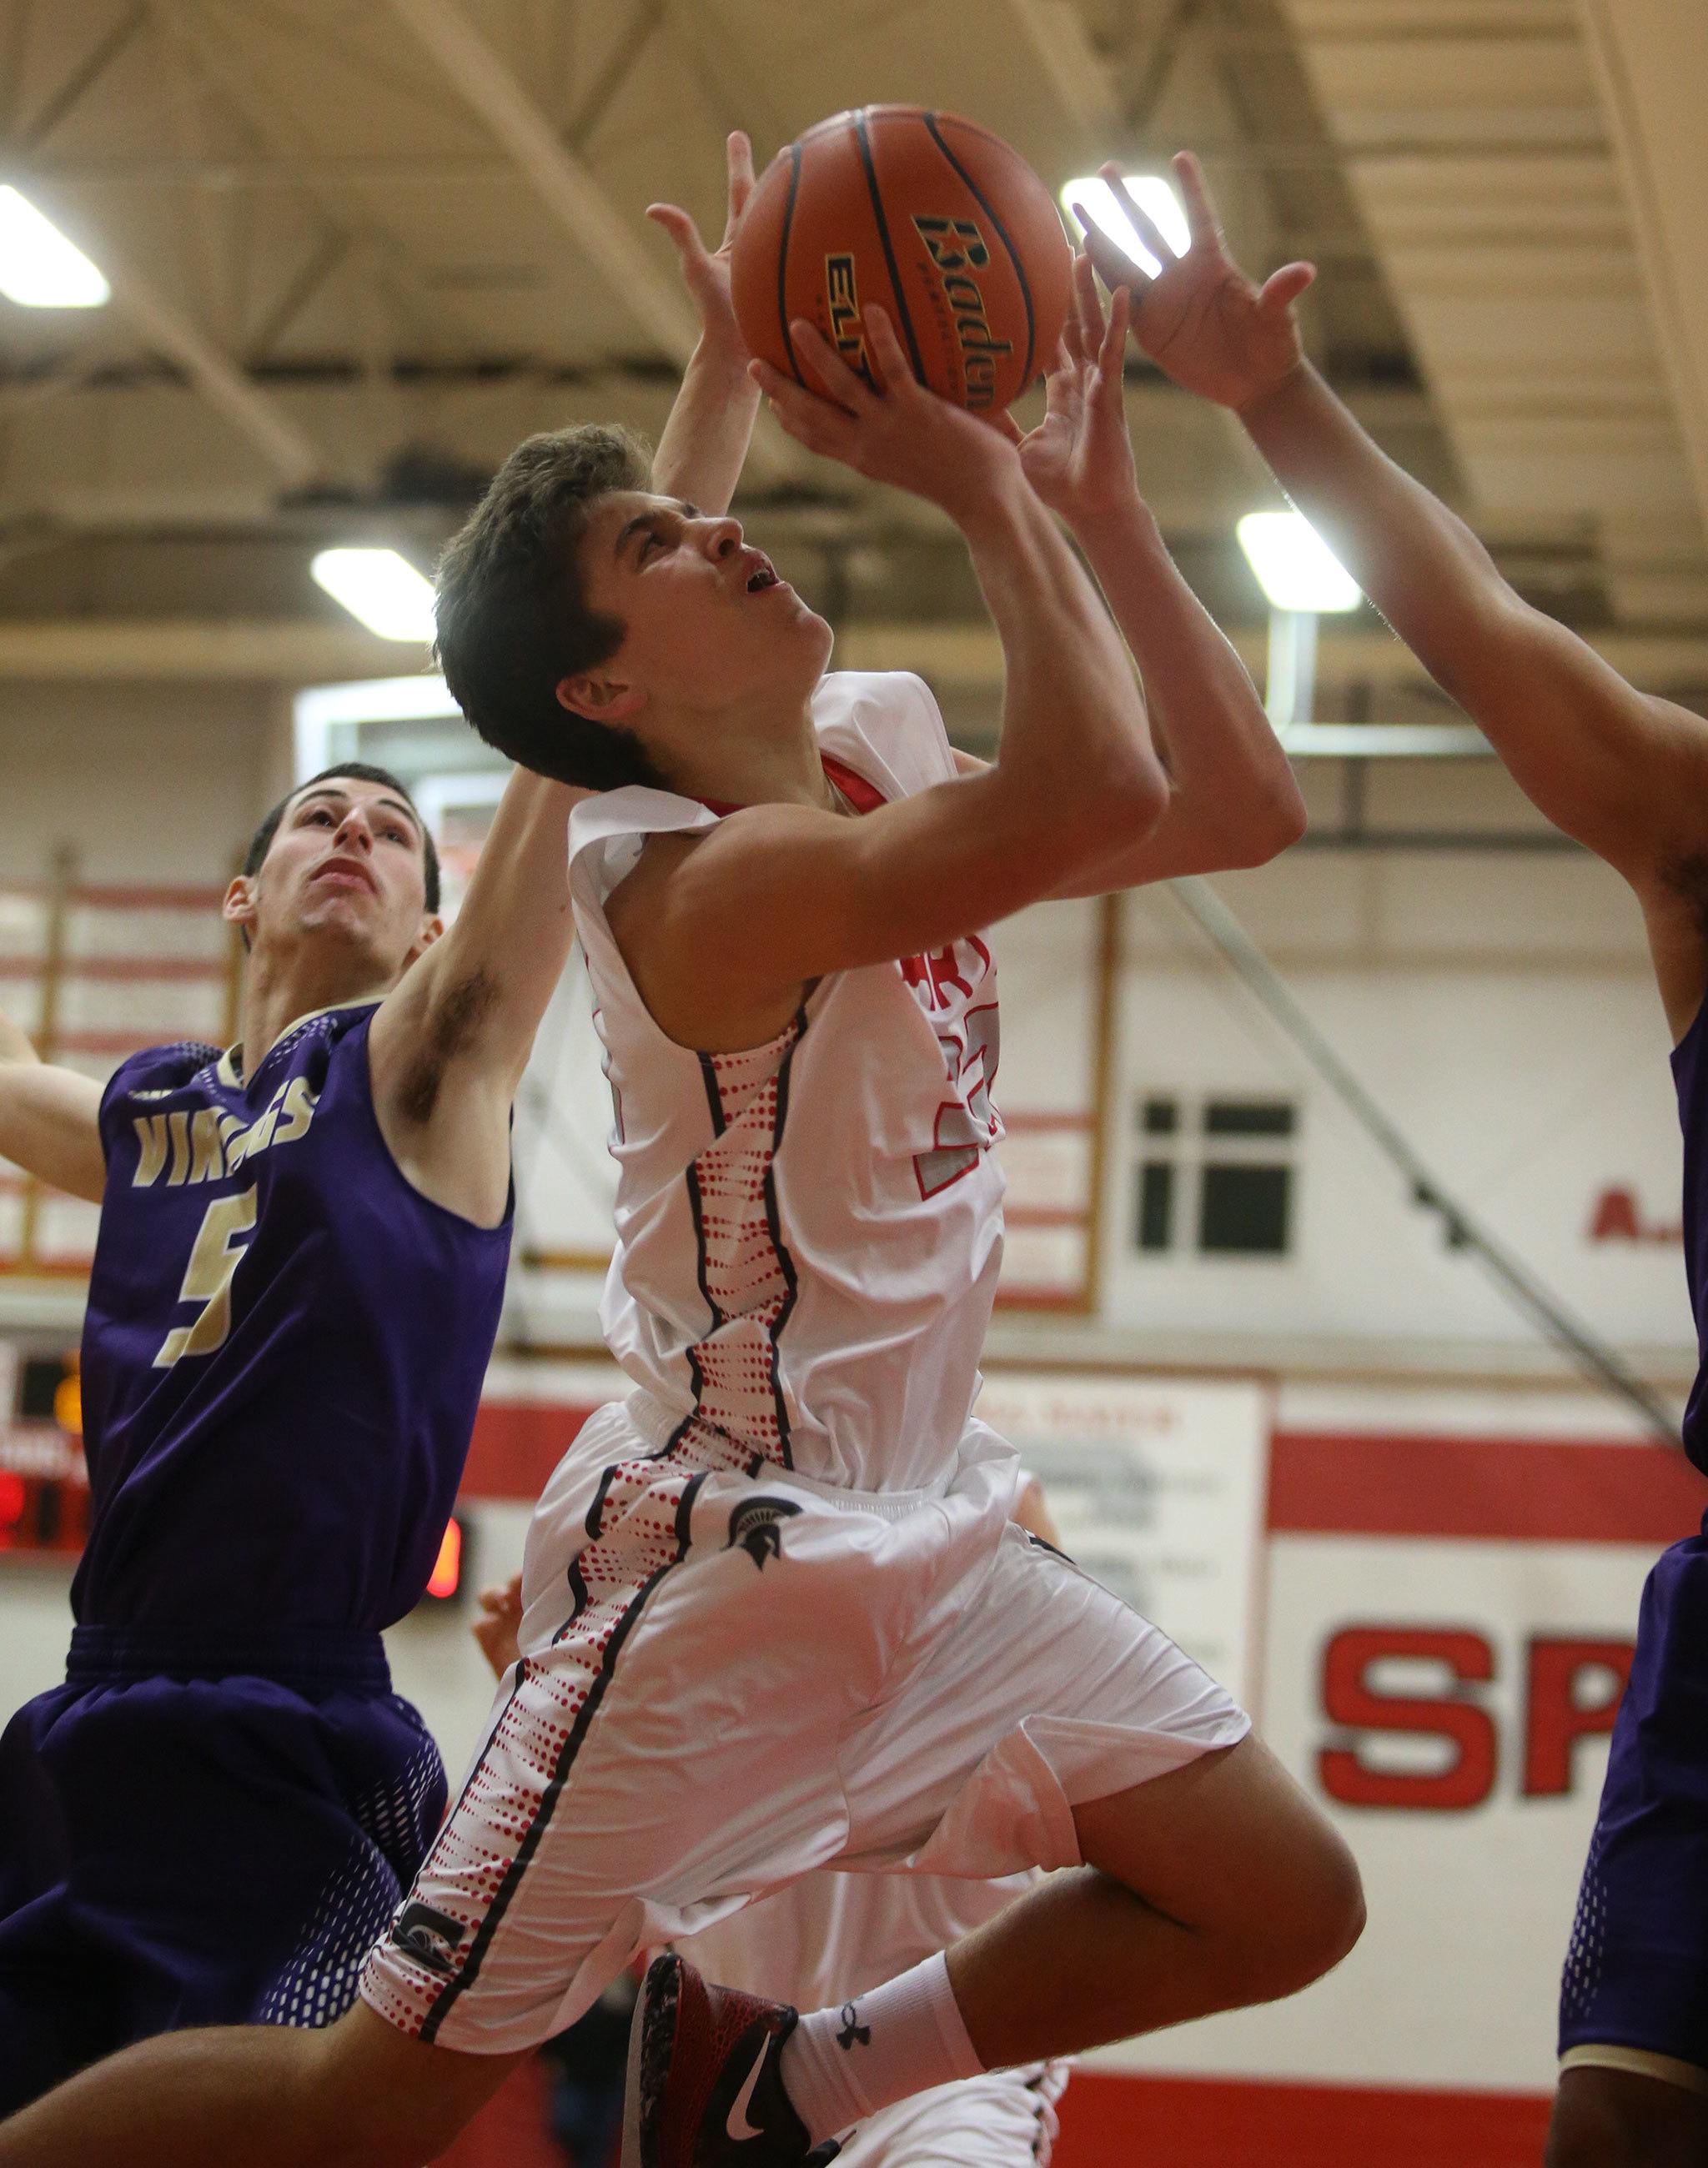 Stanwood’s Nate Kummer is fouled as he goes up for a shot during a game against Lake Stevens on Tuesday in Stanwood. The Spartans won 74-51. (Andy Bronson / The Herald)